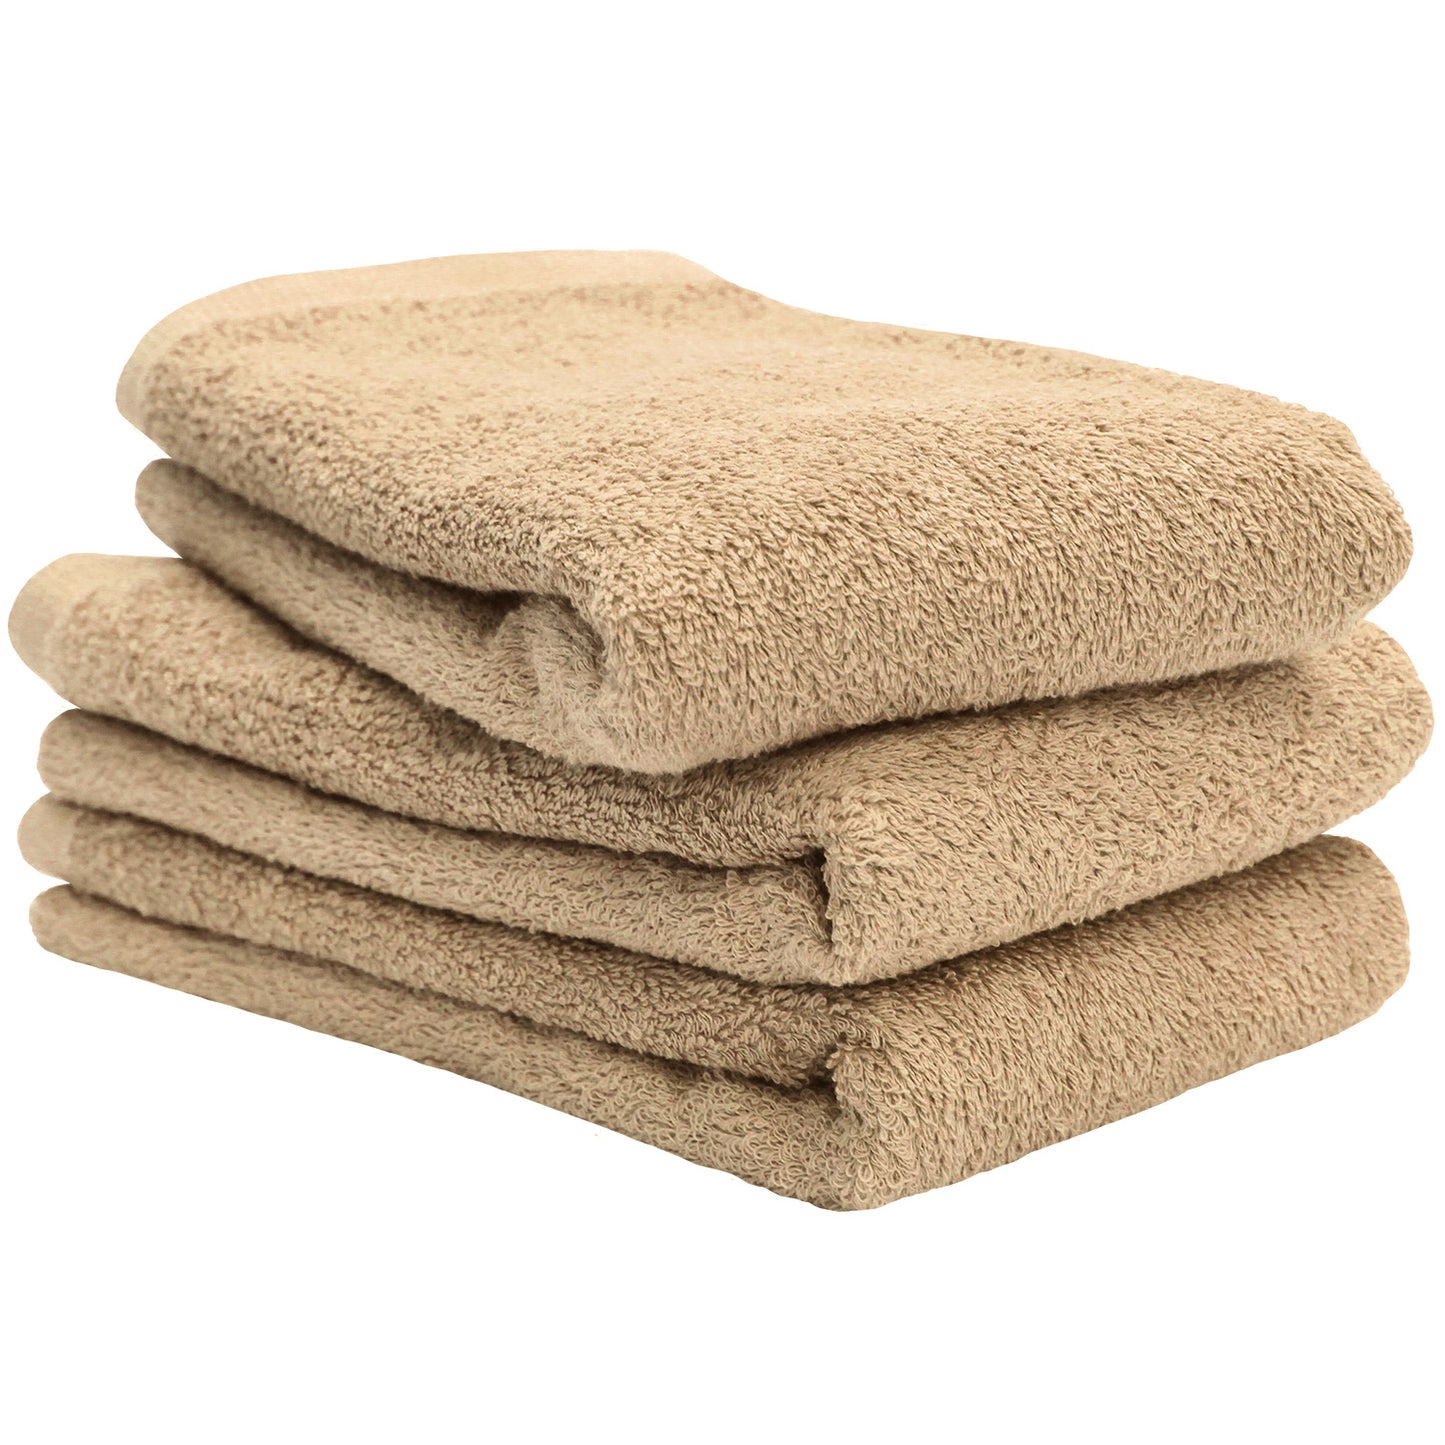 Hiorie Hotel Soft Bactericidal Water-Absorption Mini Bath Towel 3 Sheets Cotton